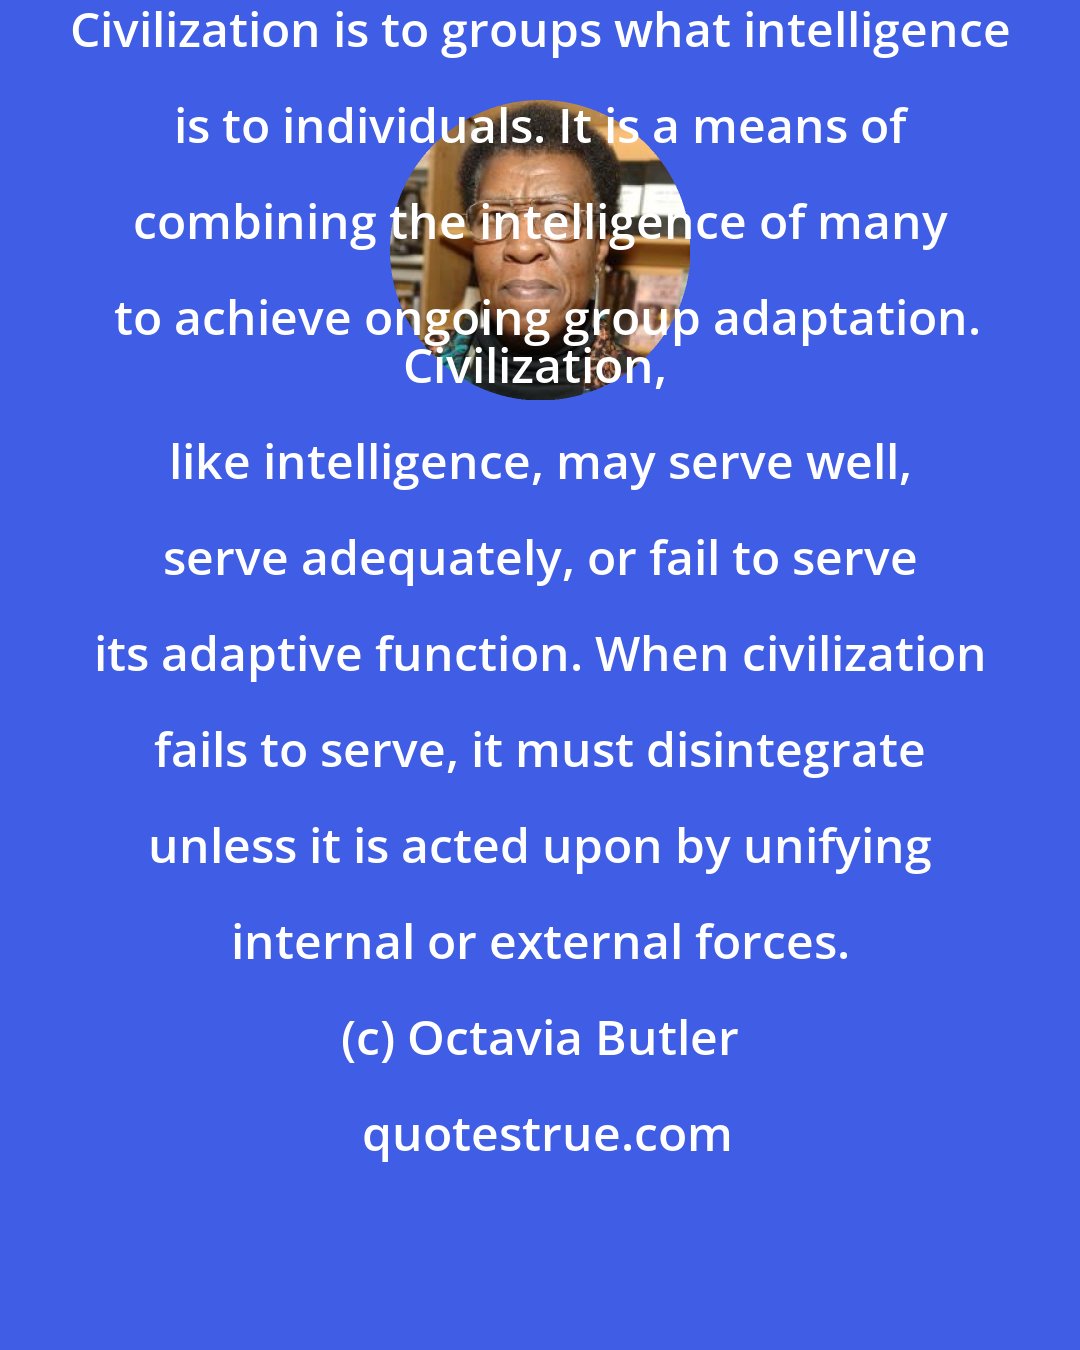 Octavia Butler: Civilization is to groups what intelligence is to individuals. It is a means of combining the intelligence of many to achieve ongoing group adaptation.
Civilization, like intelligence, may serve well, serve adequately, or fail to serve its adaptive function. When civilization fails to serve, it must disintegrate unless it is acted upon by unifying internal or external forces.